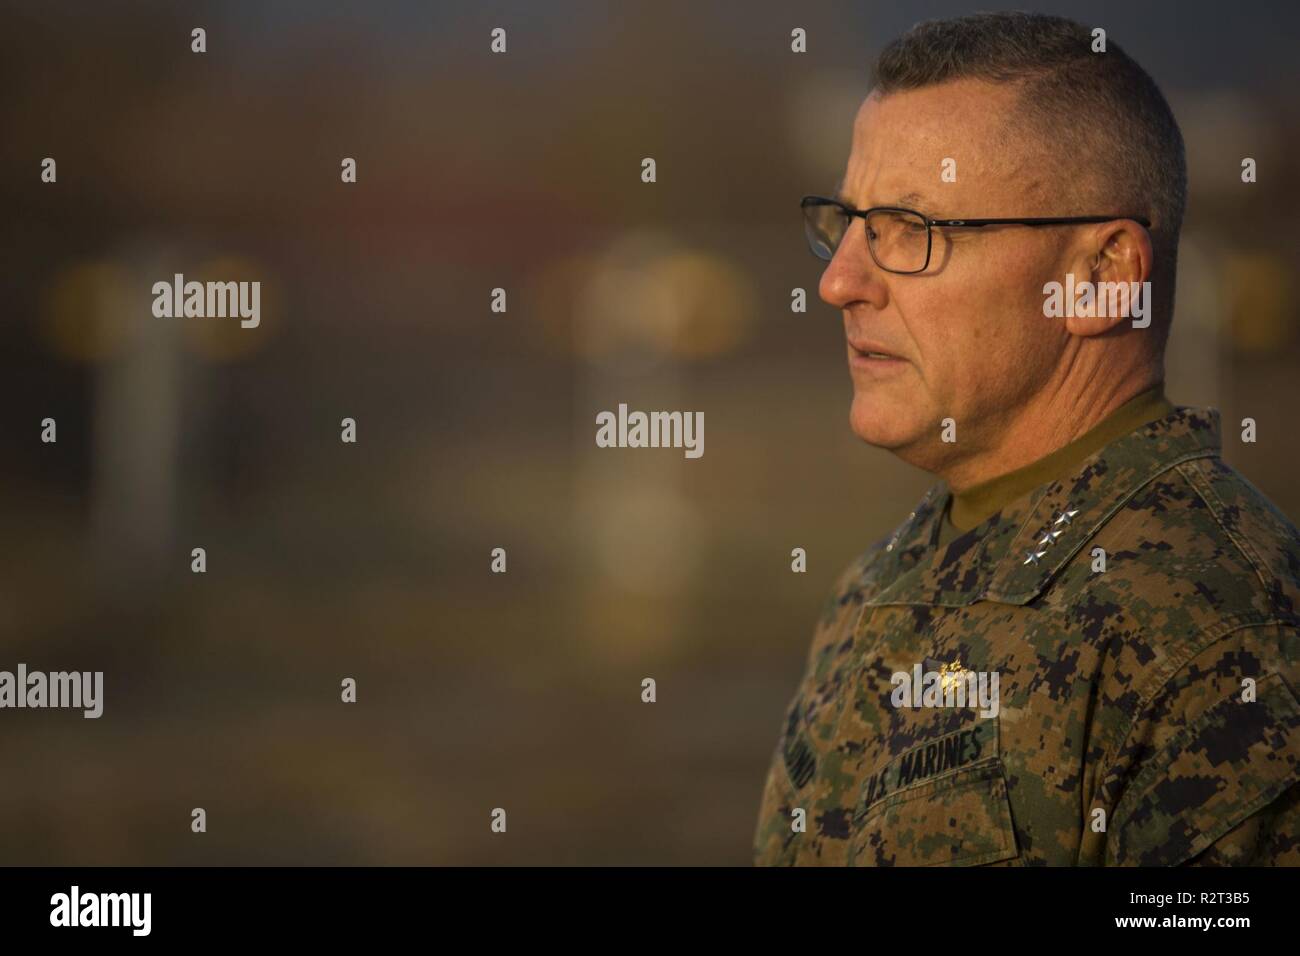 U.S. Marine Corps Lt. Gen. Robert F. Hedelund, the commanding general of II Marine Expeditionary Force, answers questions during an interview relating to a 'What Matters to Us' campaign during Exercise Trident Juncture 18 at Vaernes Air Station, Norway, Nov. 7, 2018.  Trident Juncture 18 enhances the U.S. and NATO Allies’ and partners’ abilities to work together collectively to conduct military operations under challenging conditions. Stock Photo